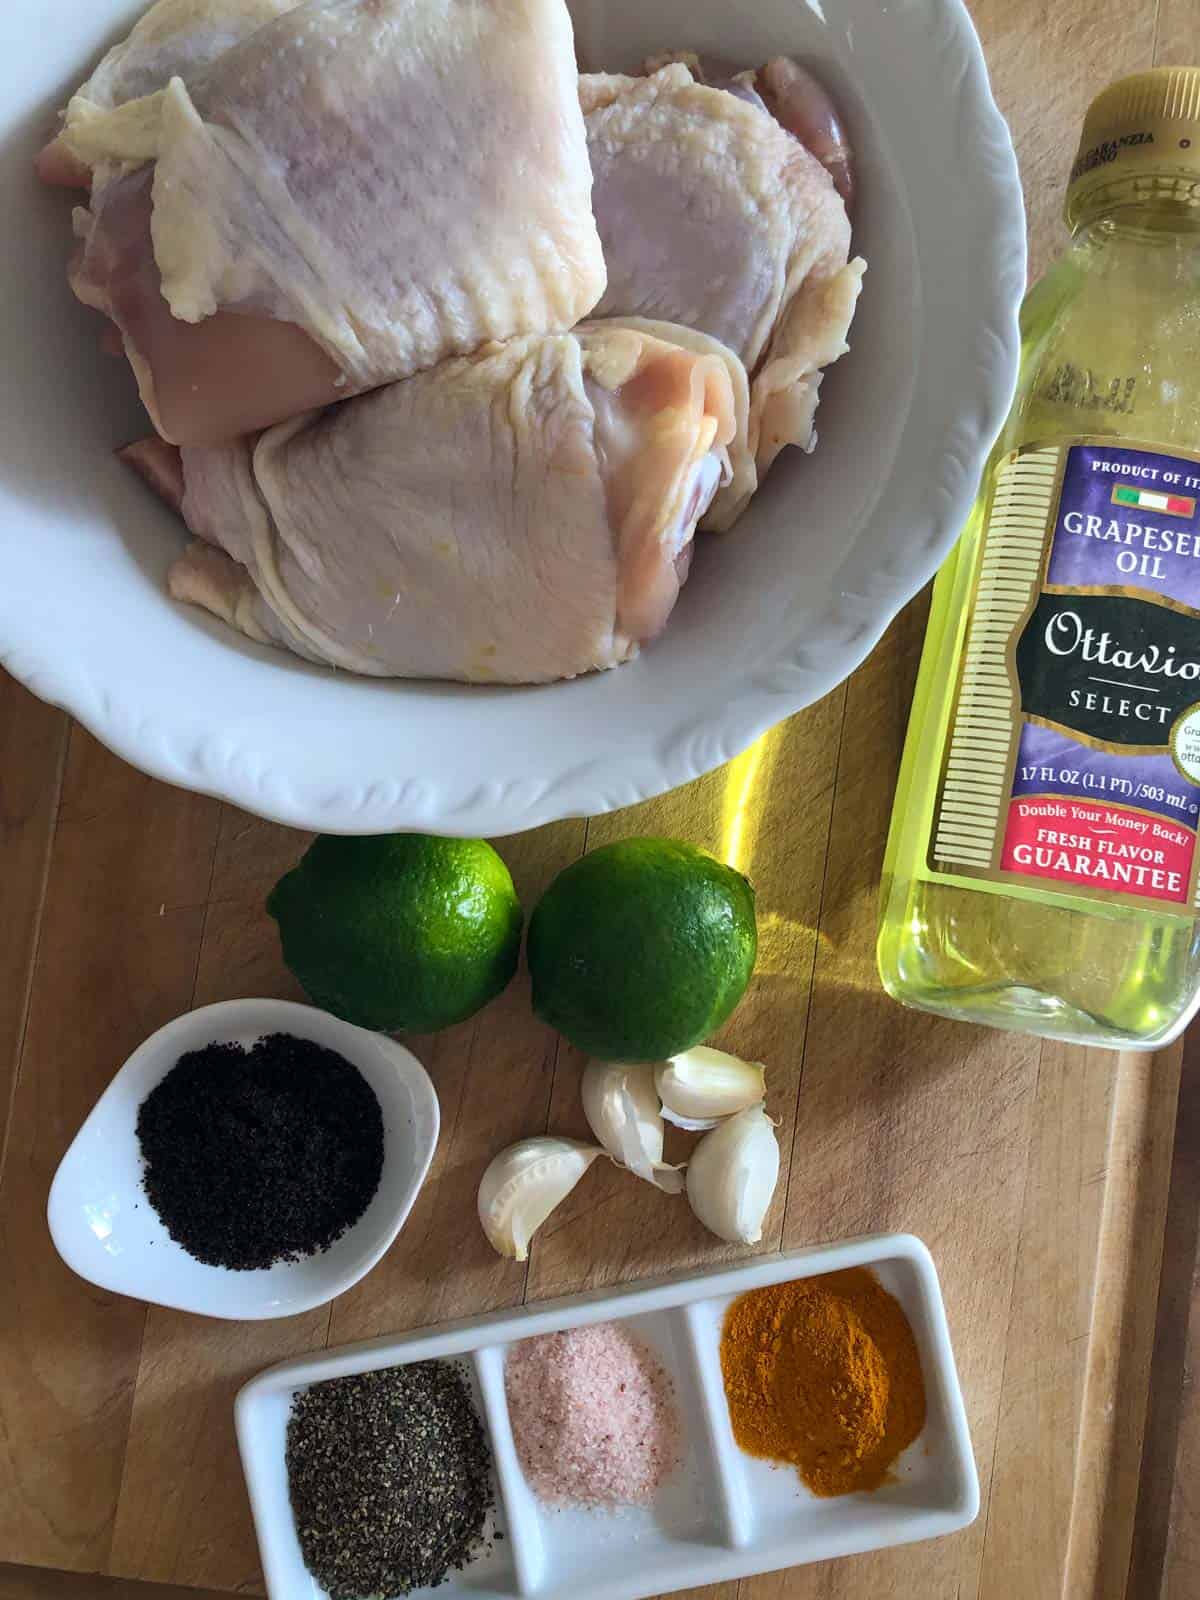 Chicken thighs with skin in a white bowl, a bottle of grapeseed oil, 2 limes, 4 cloves of garlic, sumac in a white dish, salt, pepper, and turmeric in a white dish.